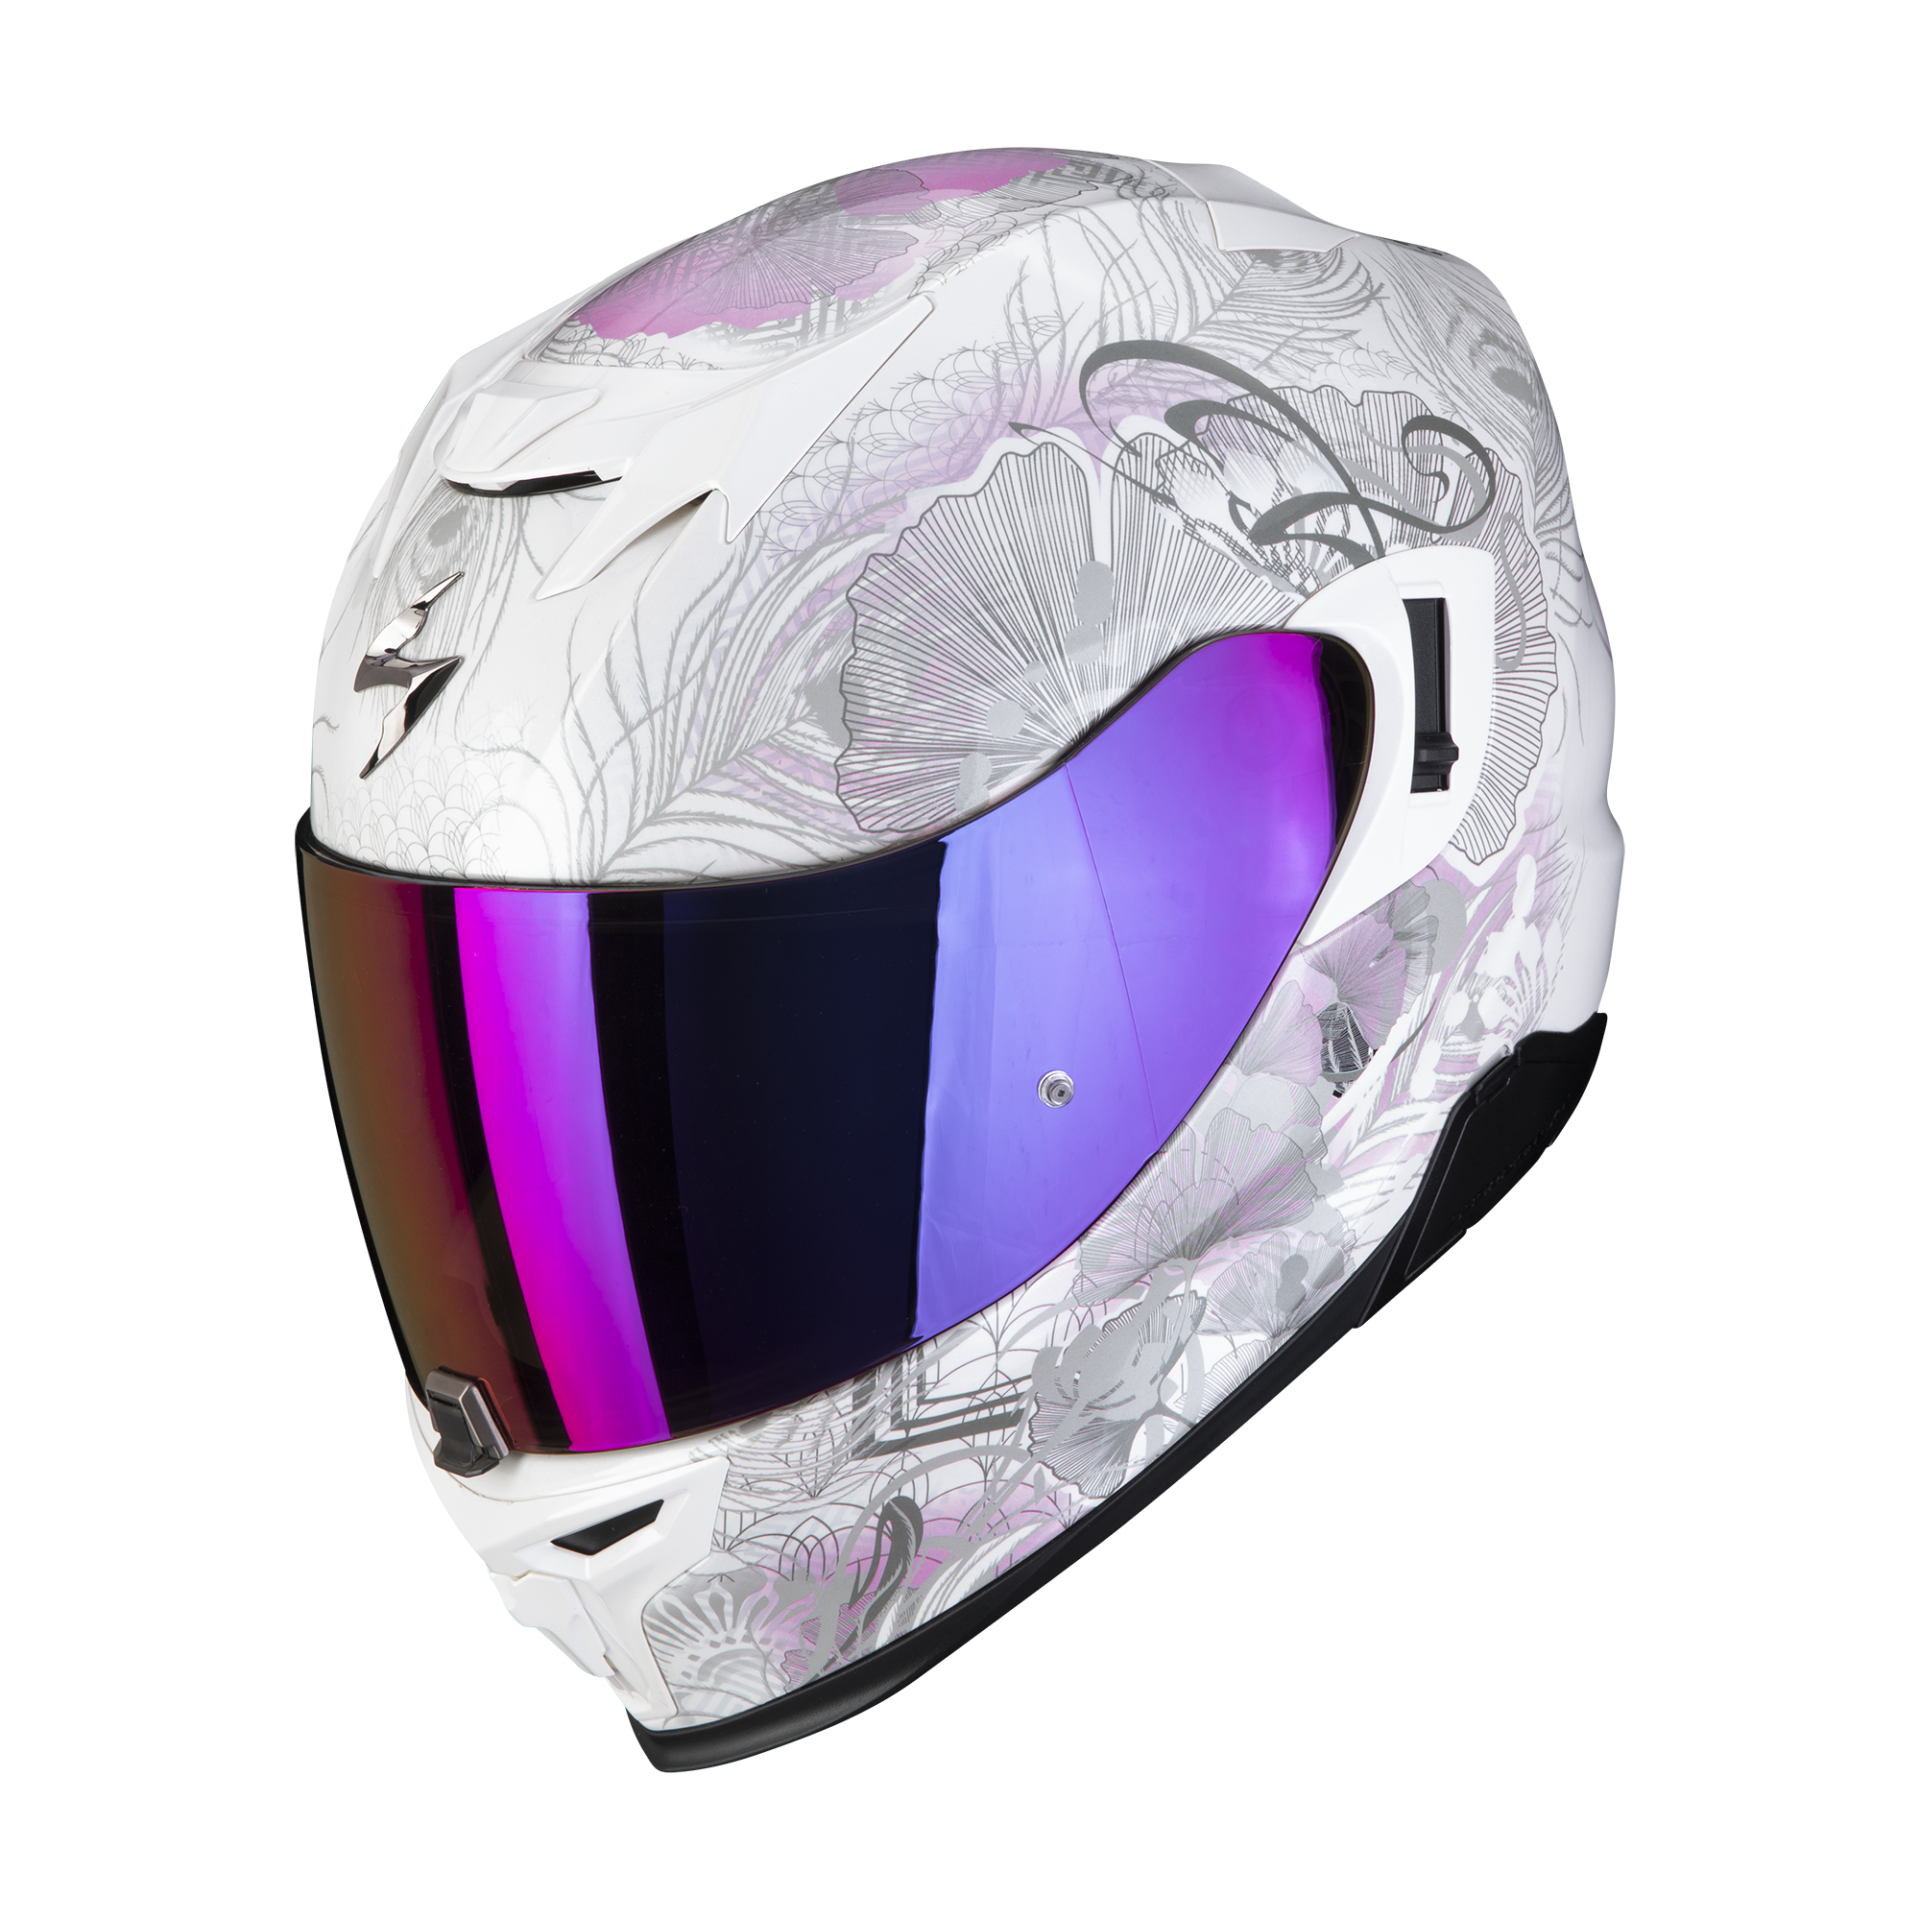 Image of Scorpion Exo-520 Evo Air Melrose Pearl White-Pink Casque Intégral Taille S